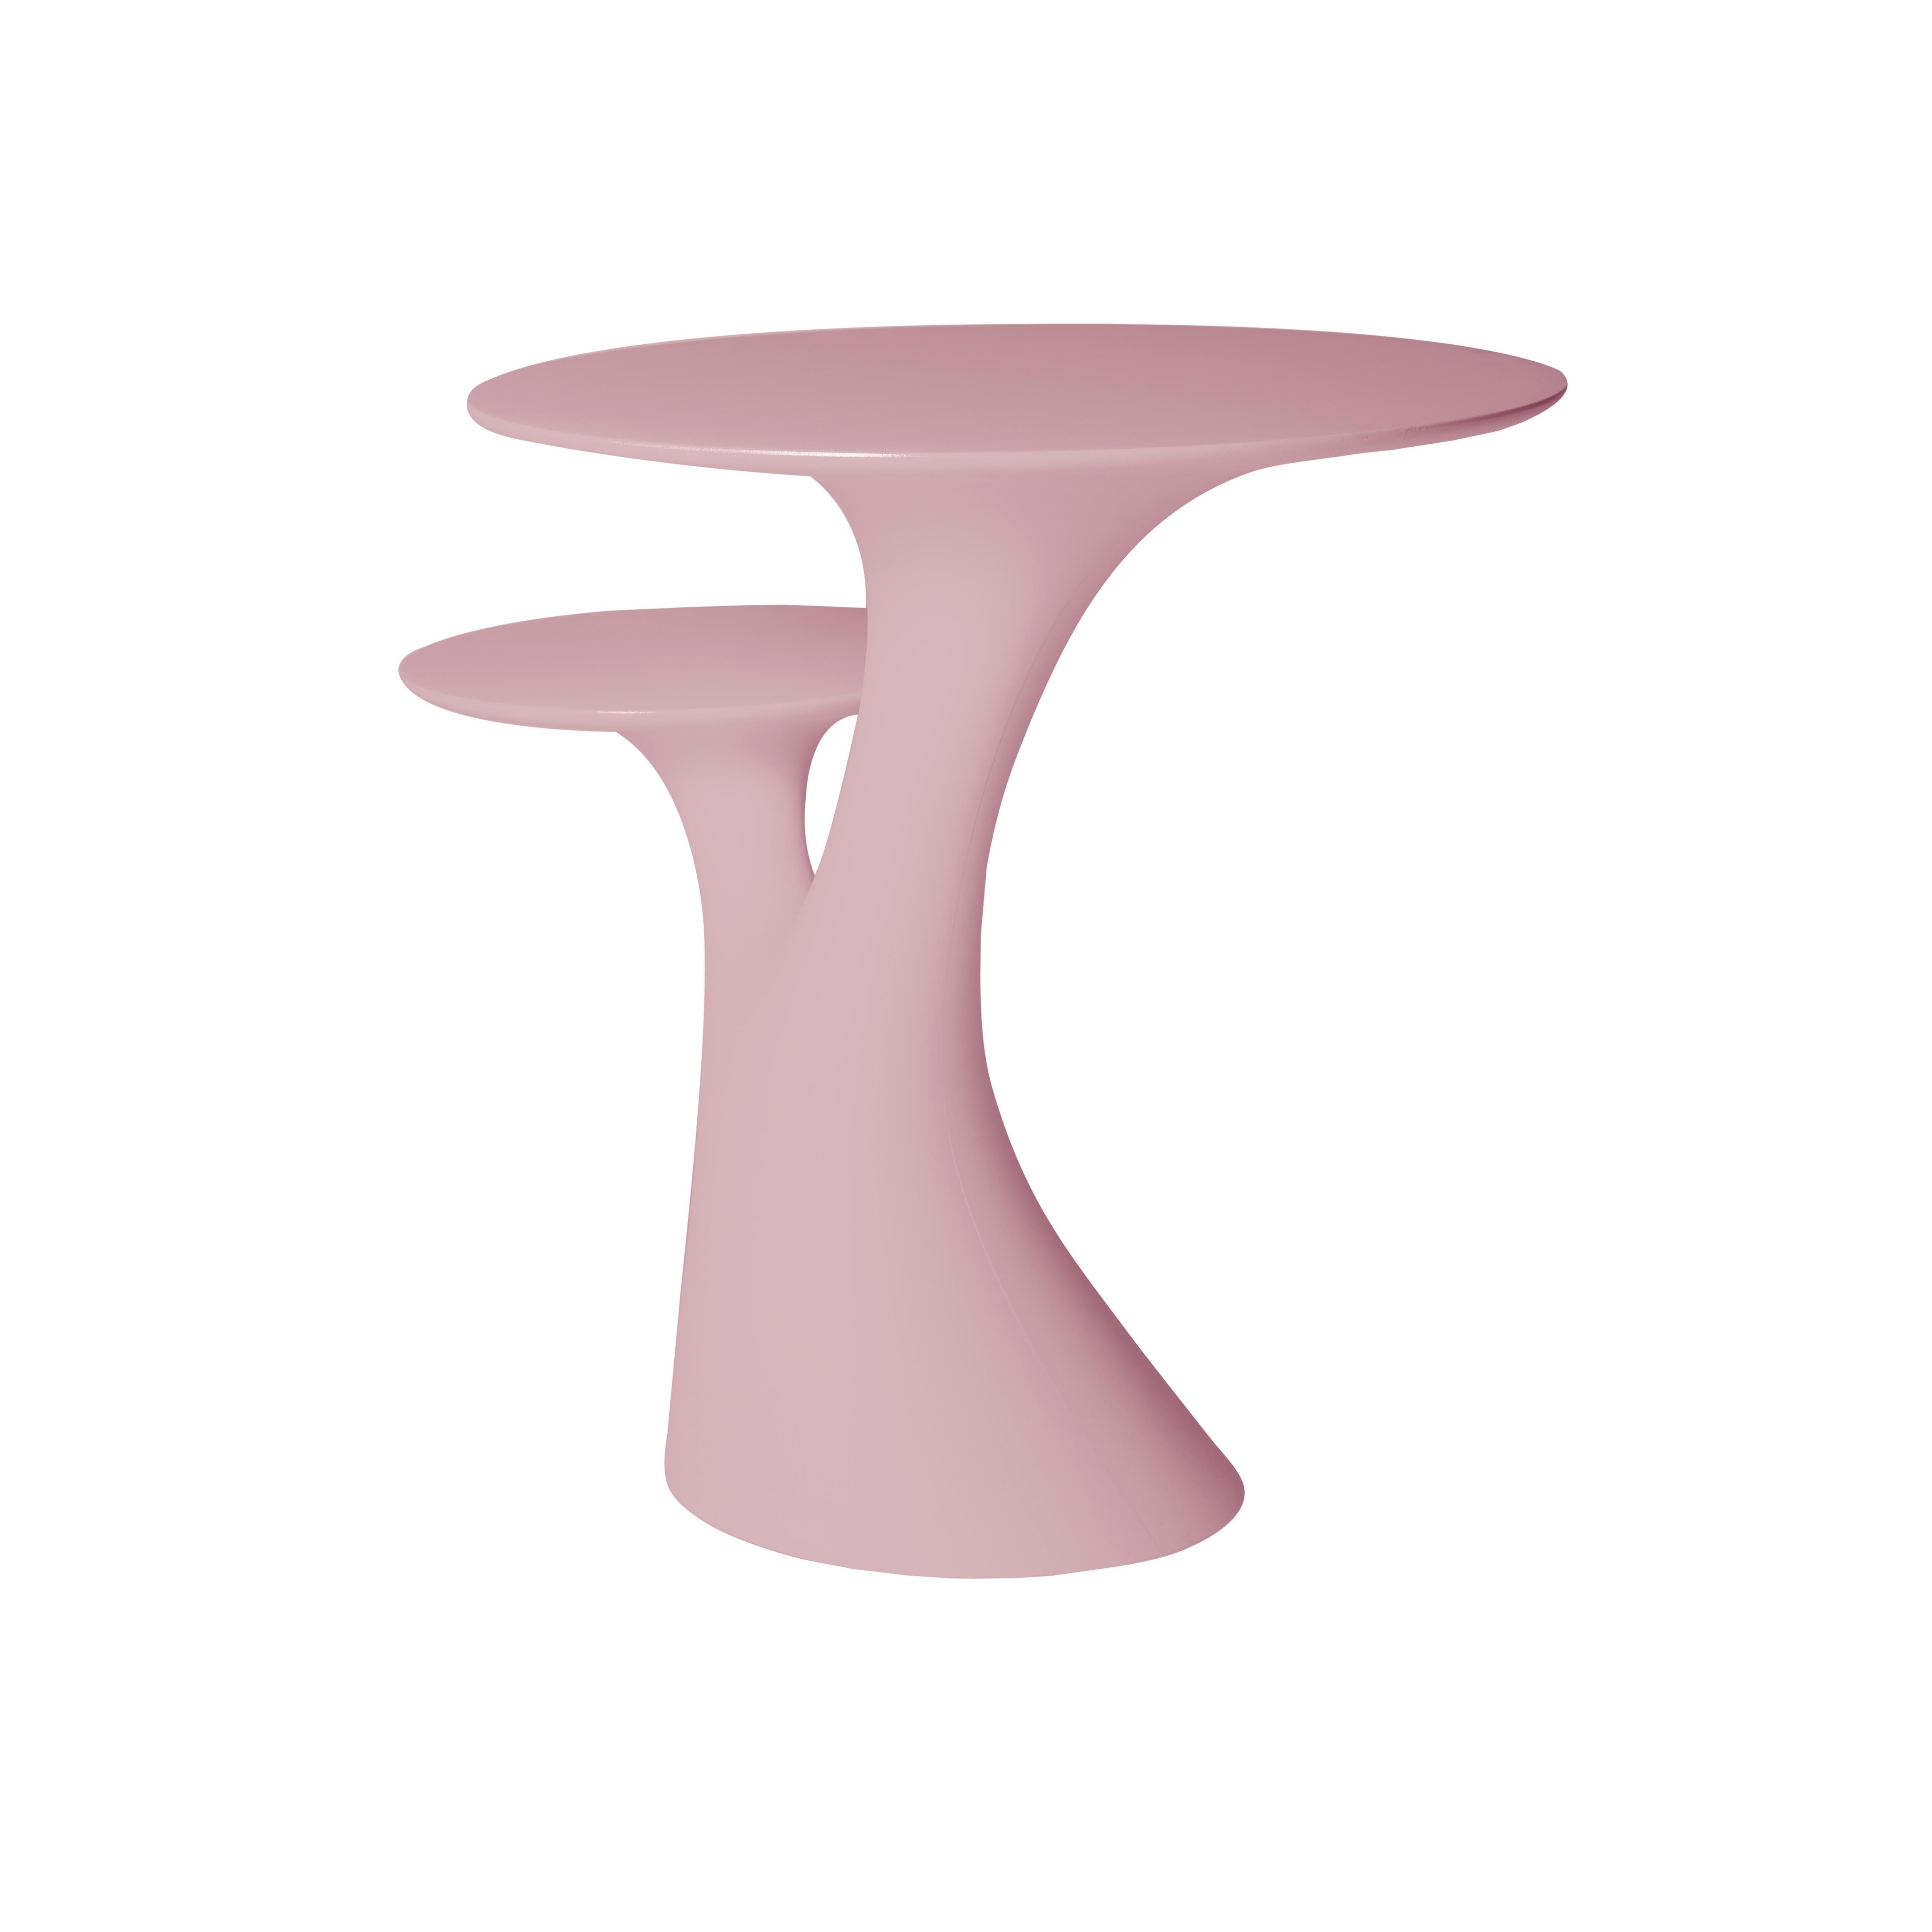 For Sale: Pink Modern Plastic White Gray Green Pink or Tree Side Table by Stefano Giovannoni